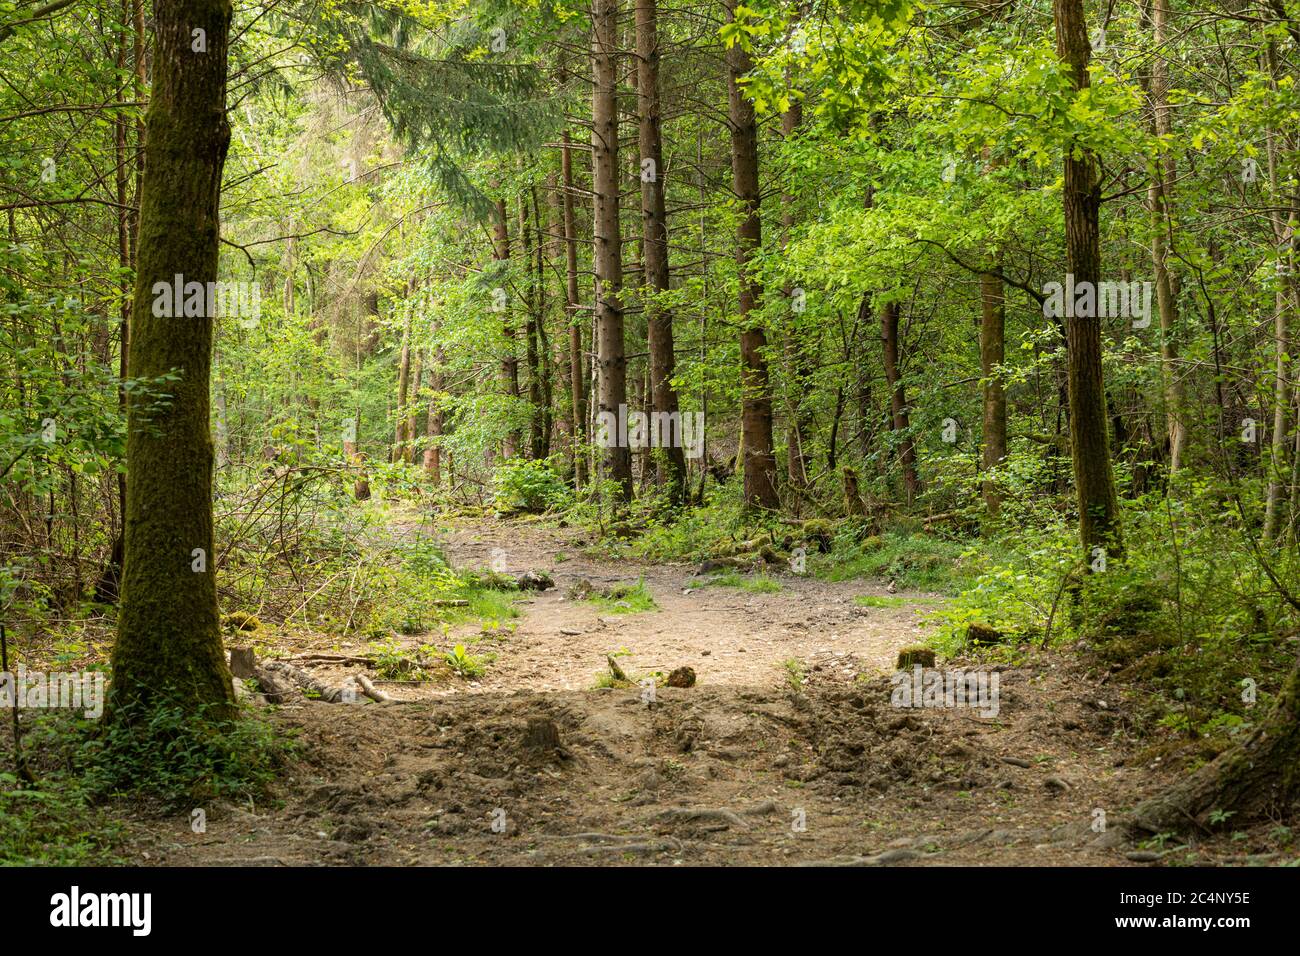 Clanger Woods ancient woodland a designated Site of Special Scientific Interest (SSSI), near Westbury, Wiltshire, England, UK Stock Photo